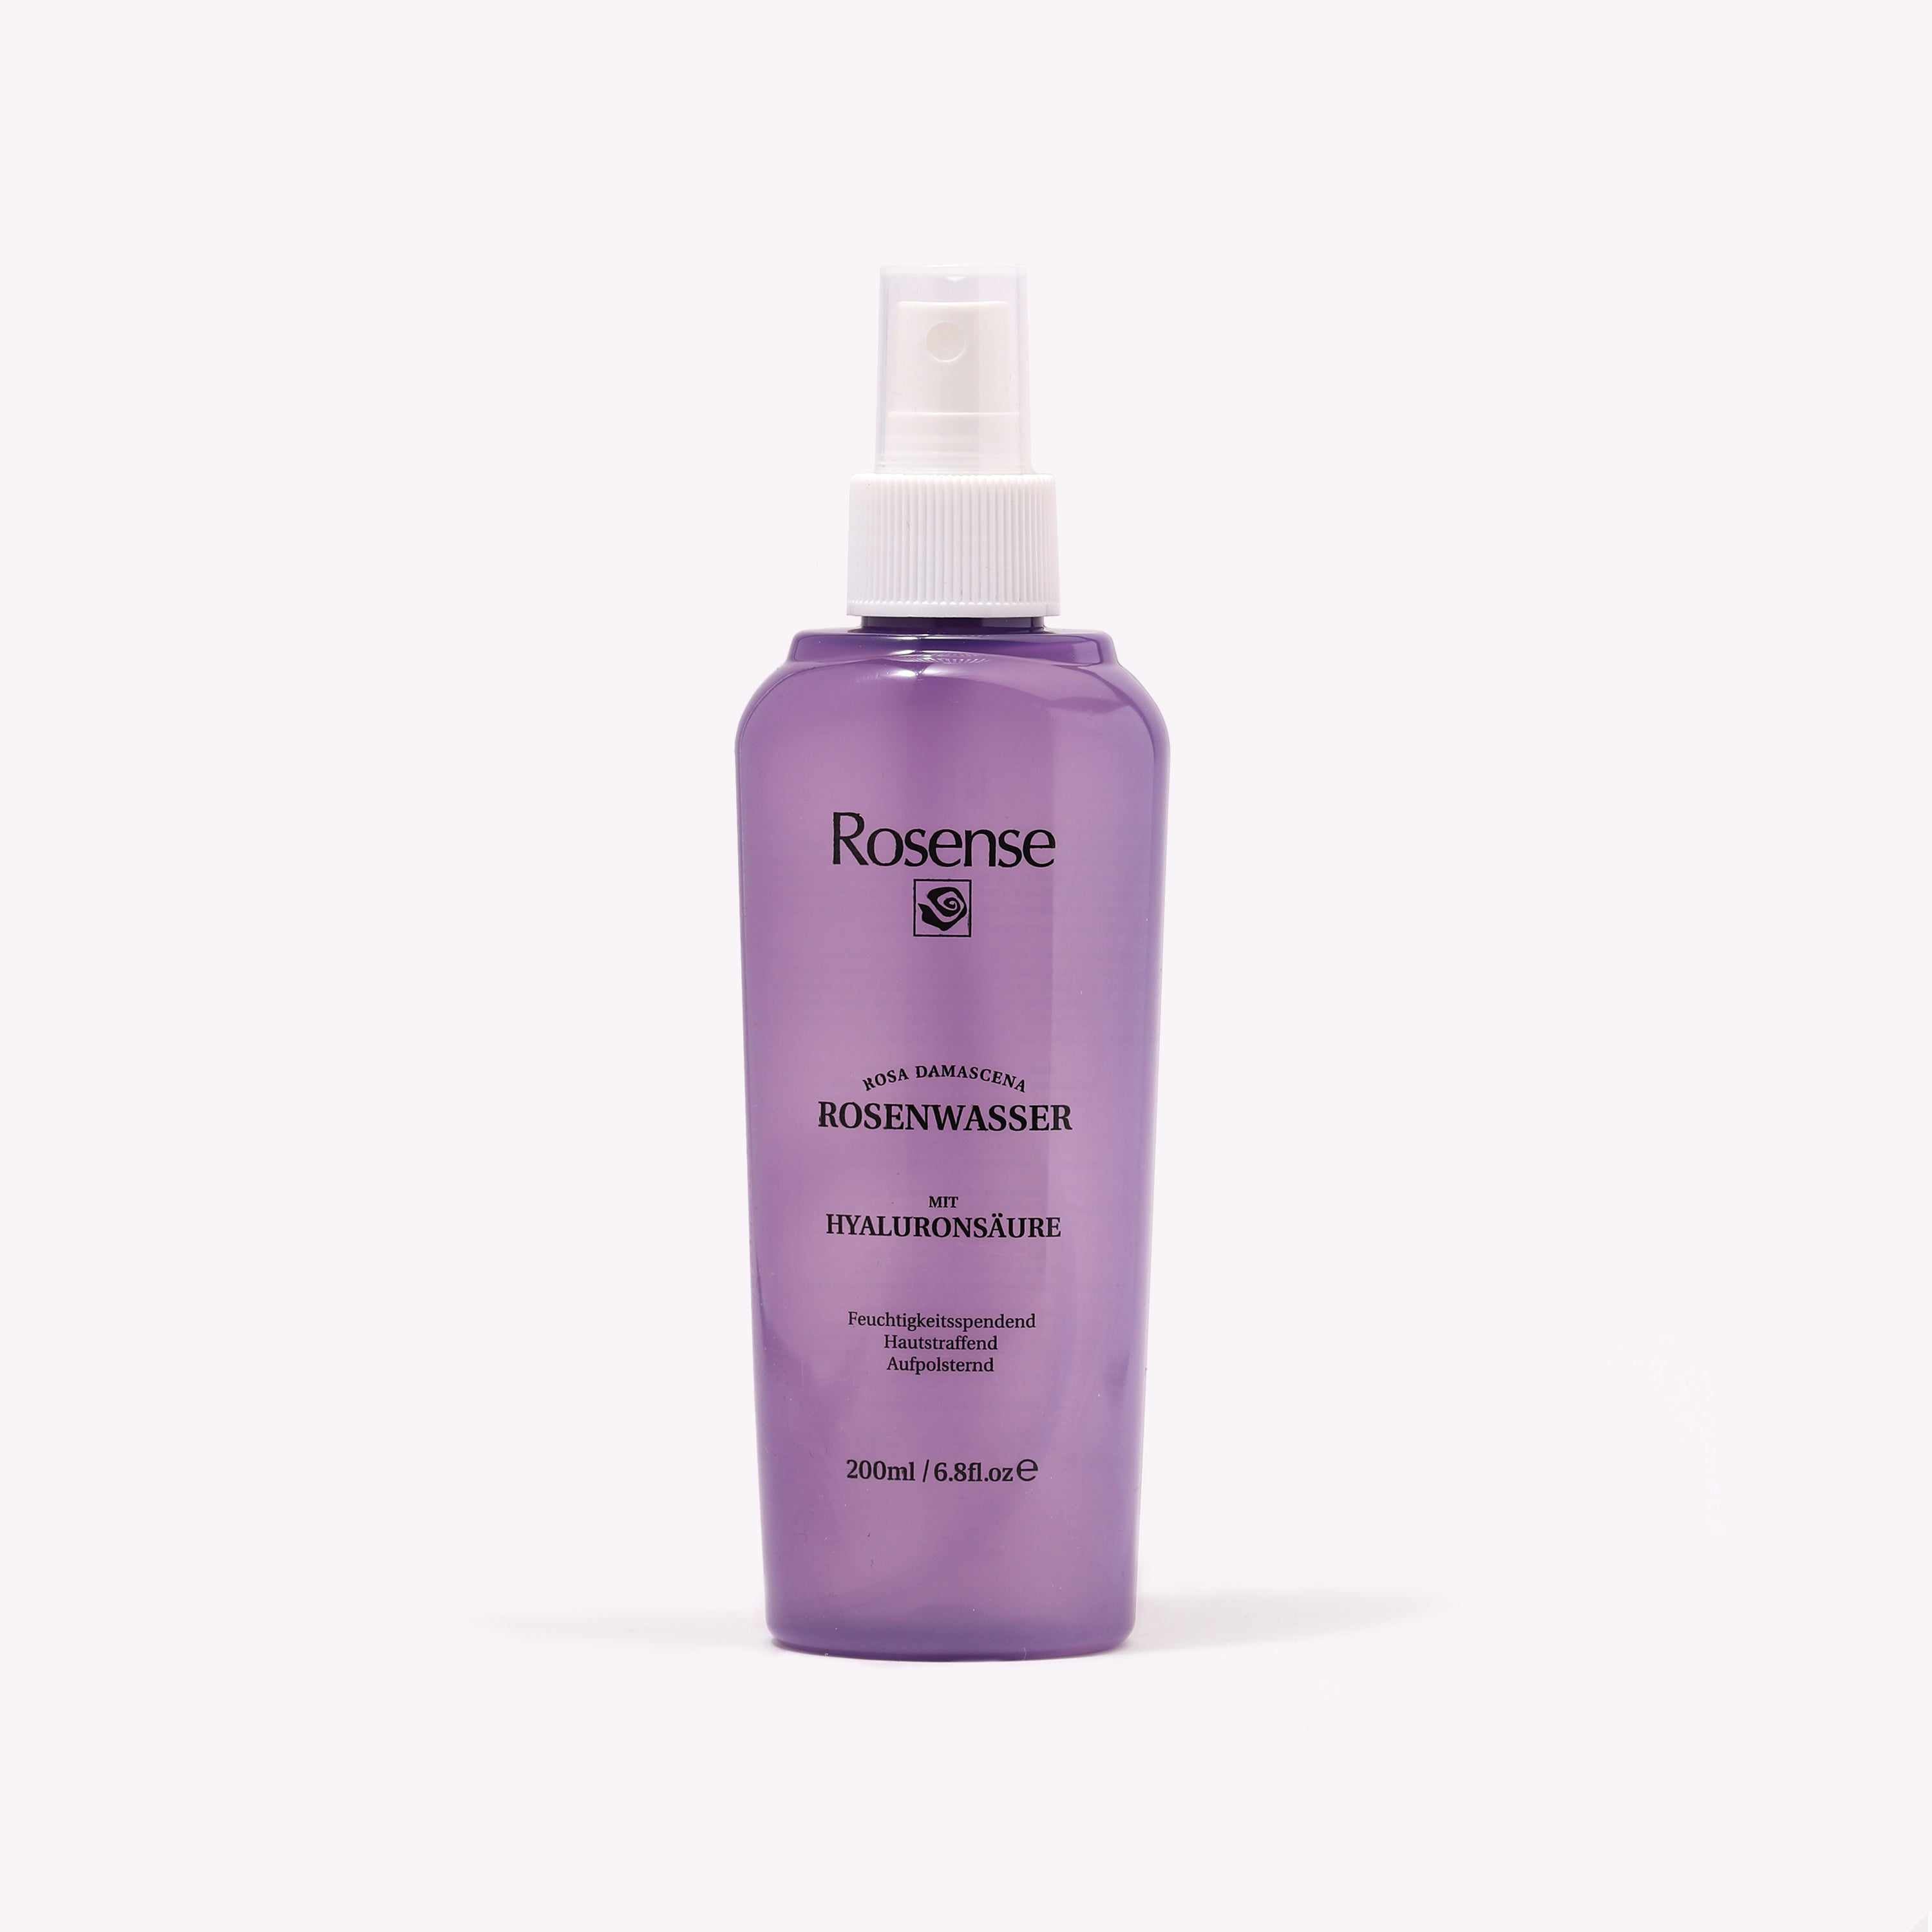 Rose water with hyaluronic acid (200 ml) from Rosense based on